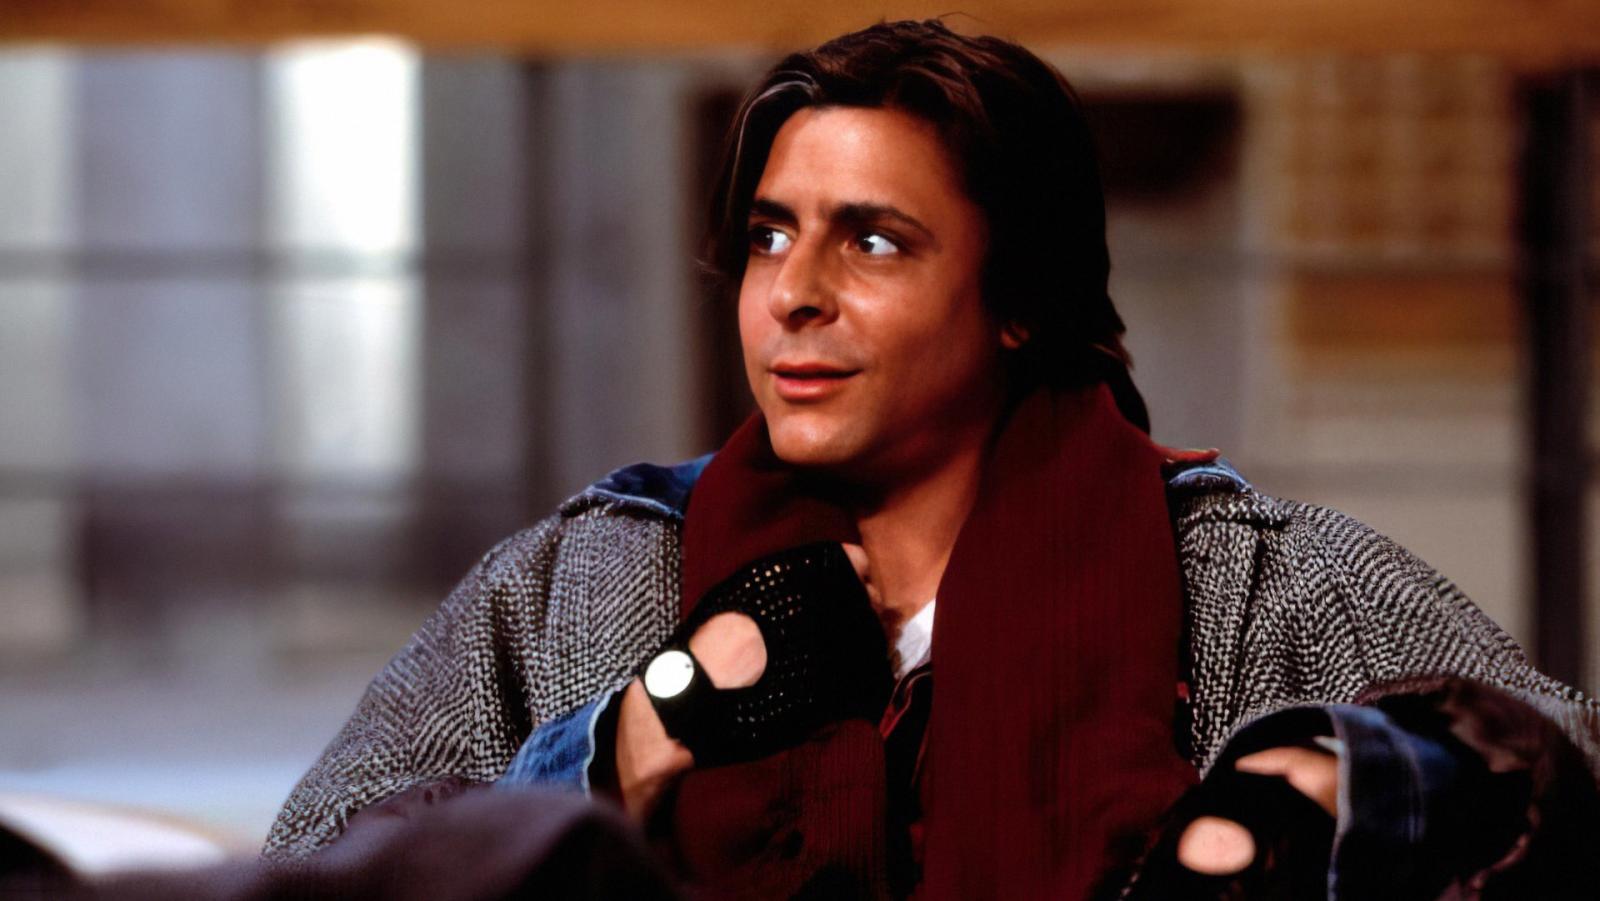 See Judd Nelson, The Breakfast Club's Ultimate Bad Boy, Now at 63 - image 1